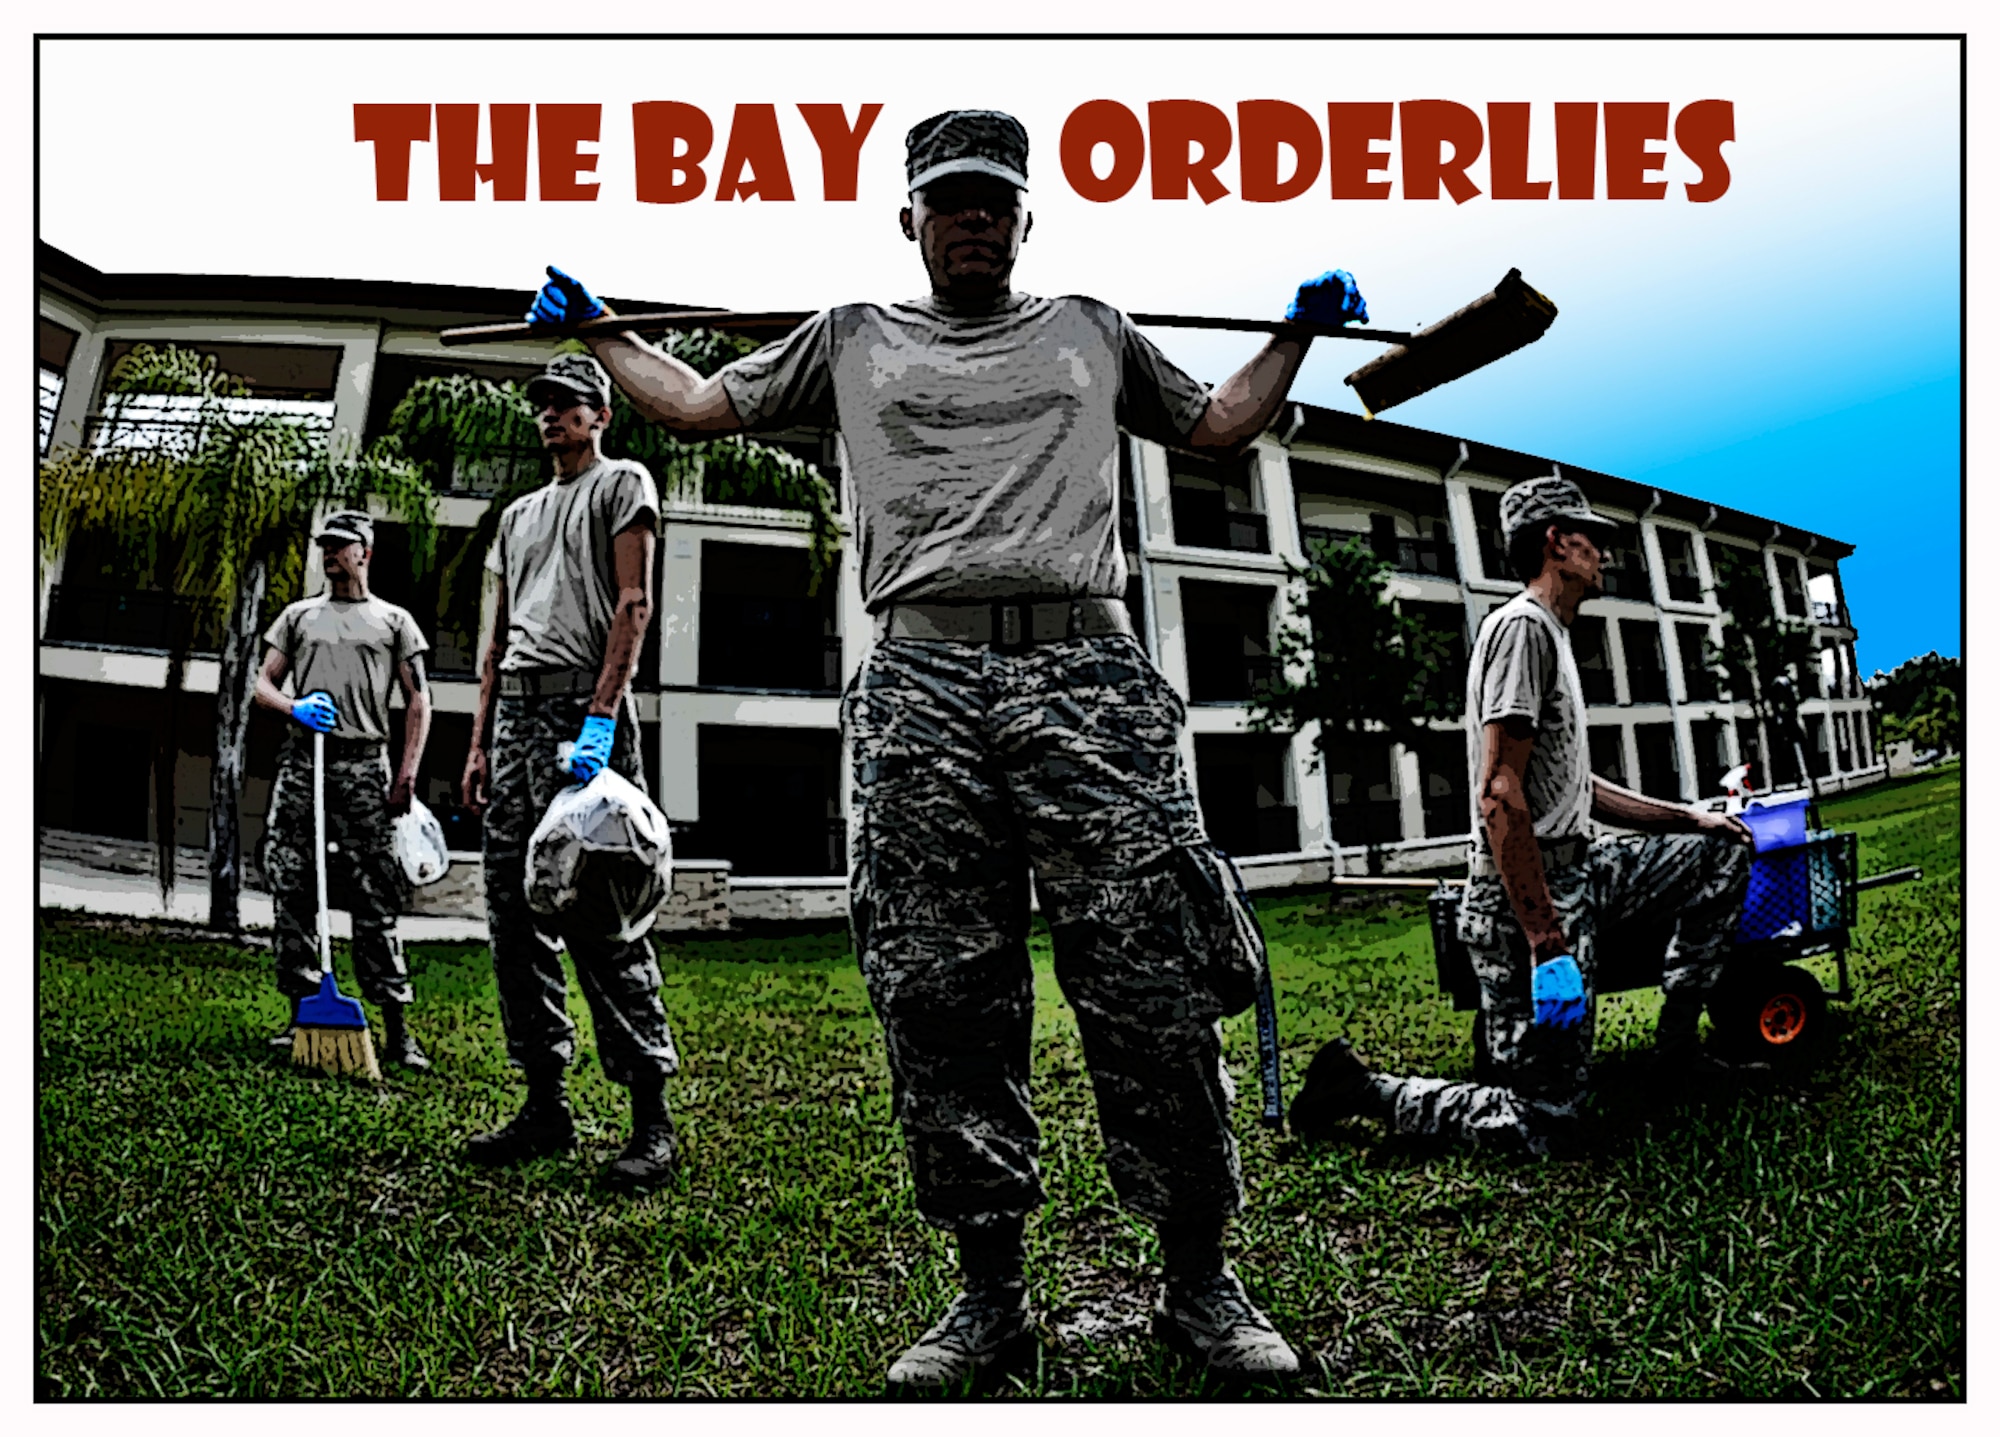 Every week four junior-enlisted Airmen living in the base dormitories are selected to participate in bay orderly. It is crucial that the bay orderlies utilize the core values and always do their best work because it reflects on the 6th Air Mobility Wing, its personnel, and all the other units on the installation. (U.S. Air Force illustration by Senior Airman Vernon L. Fowler Jr./Released)